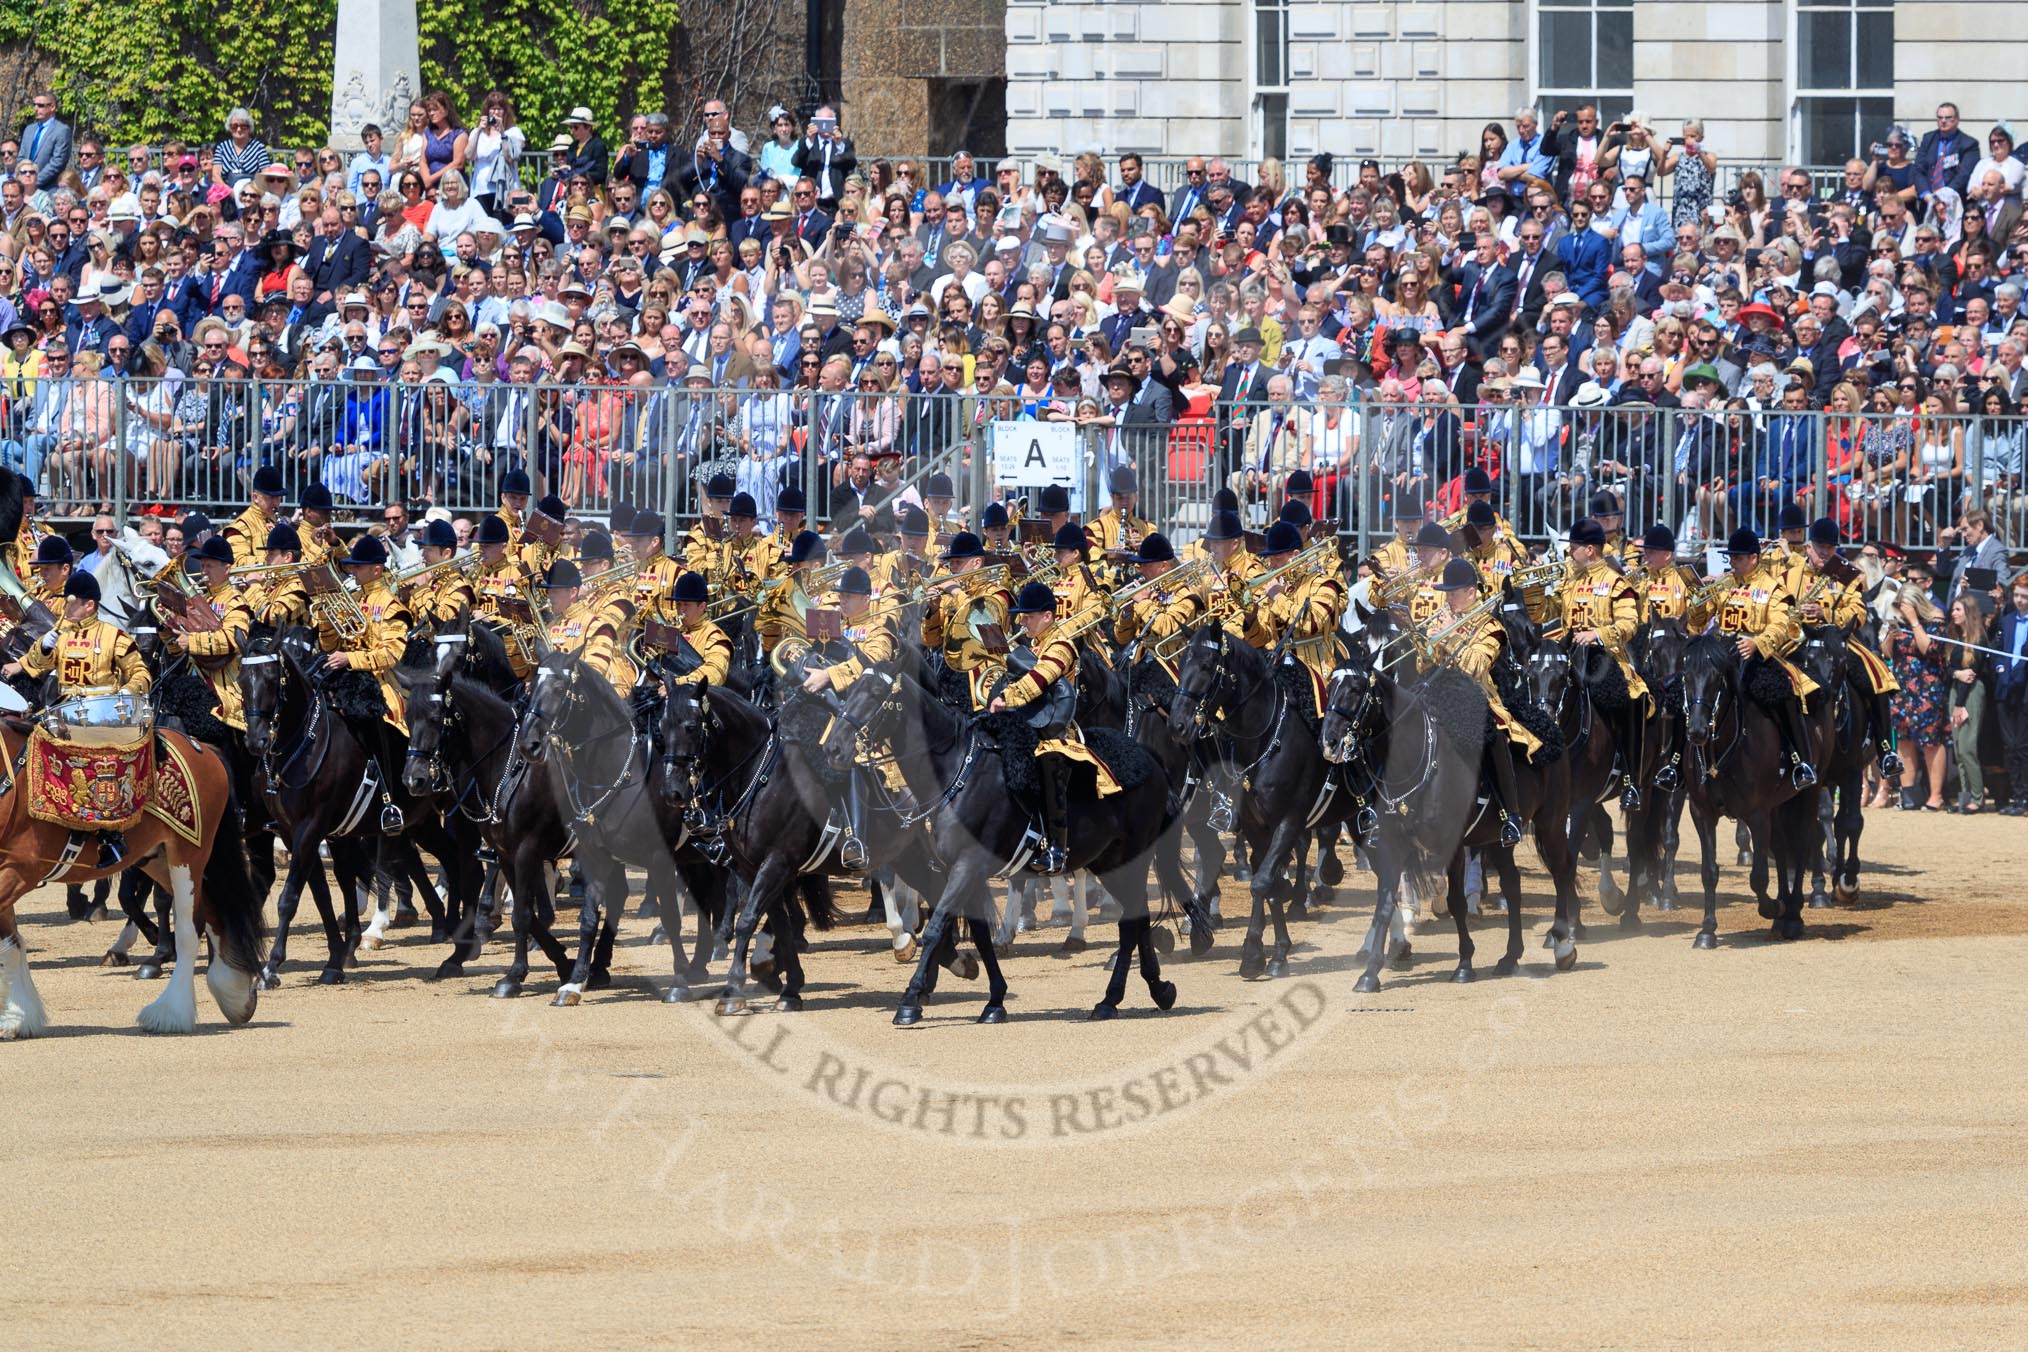 during Trooping the Colour {iptcyear4}, The Queen's Birthday Parade at Horse Guards Parade, Westminster, London, 9 June 2018, 11:55.